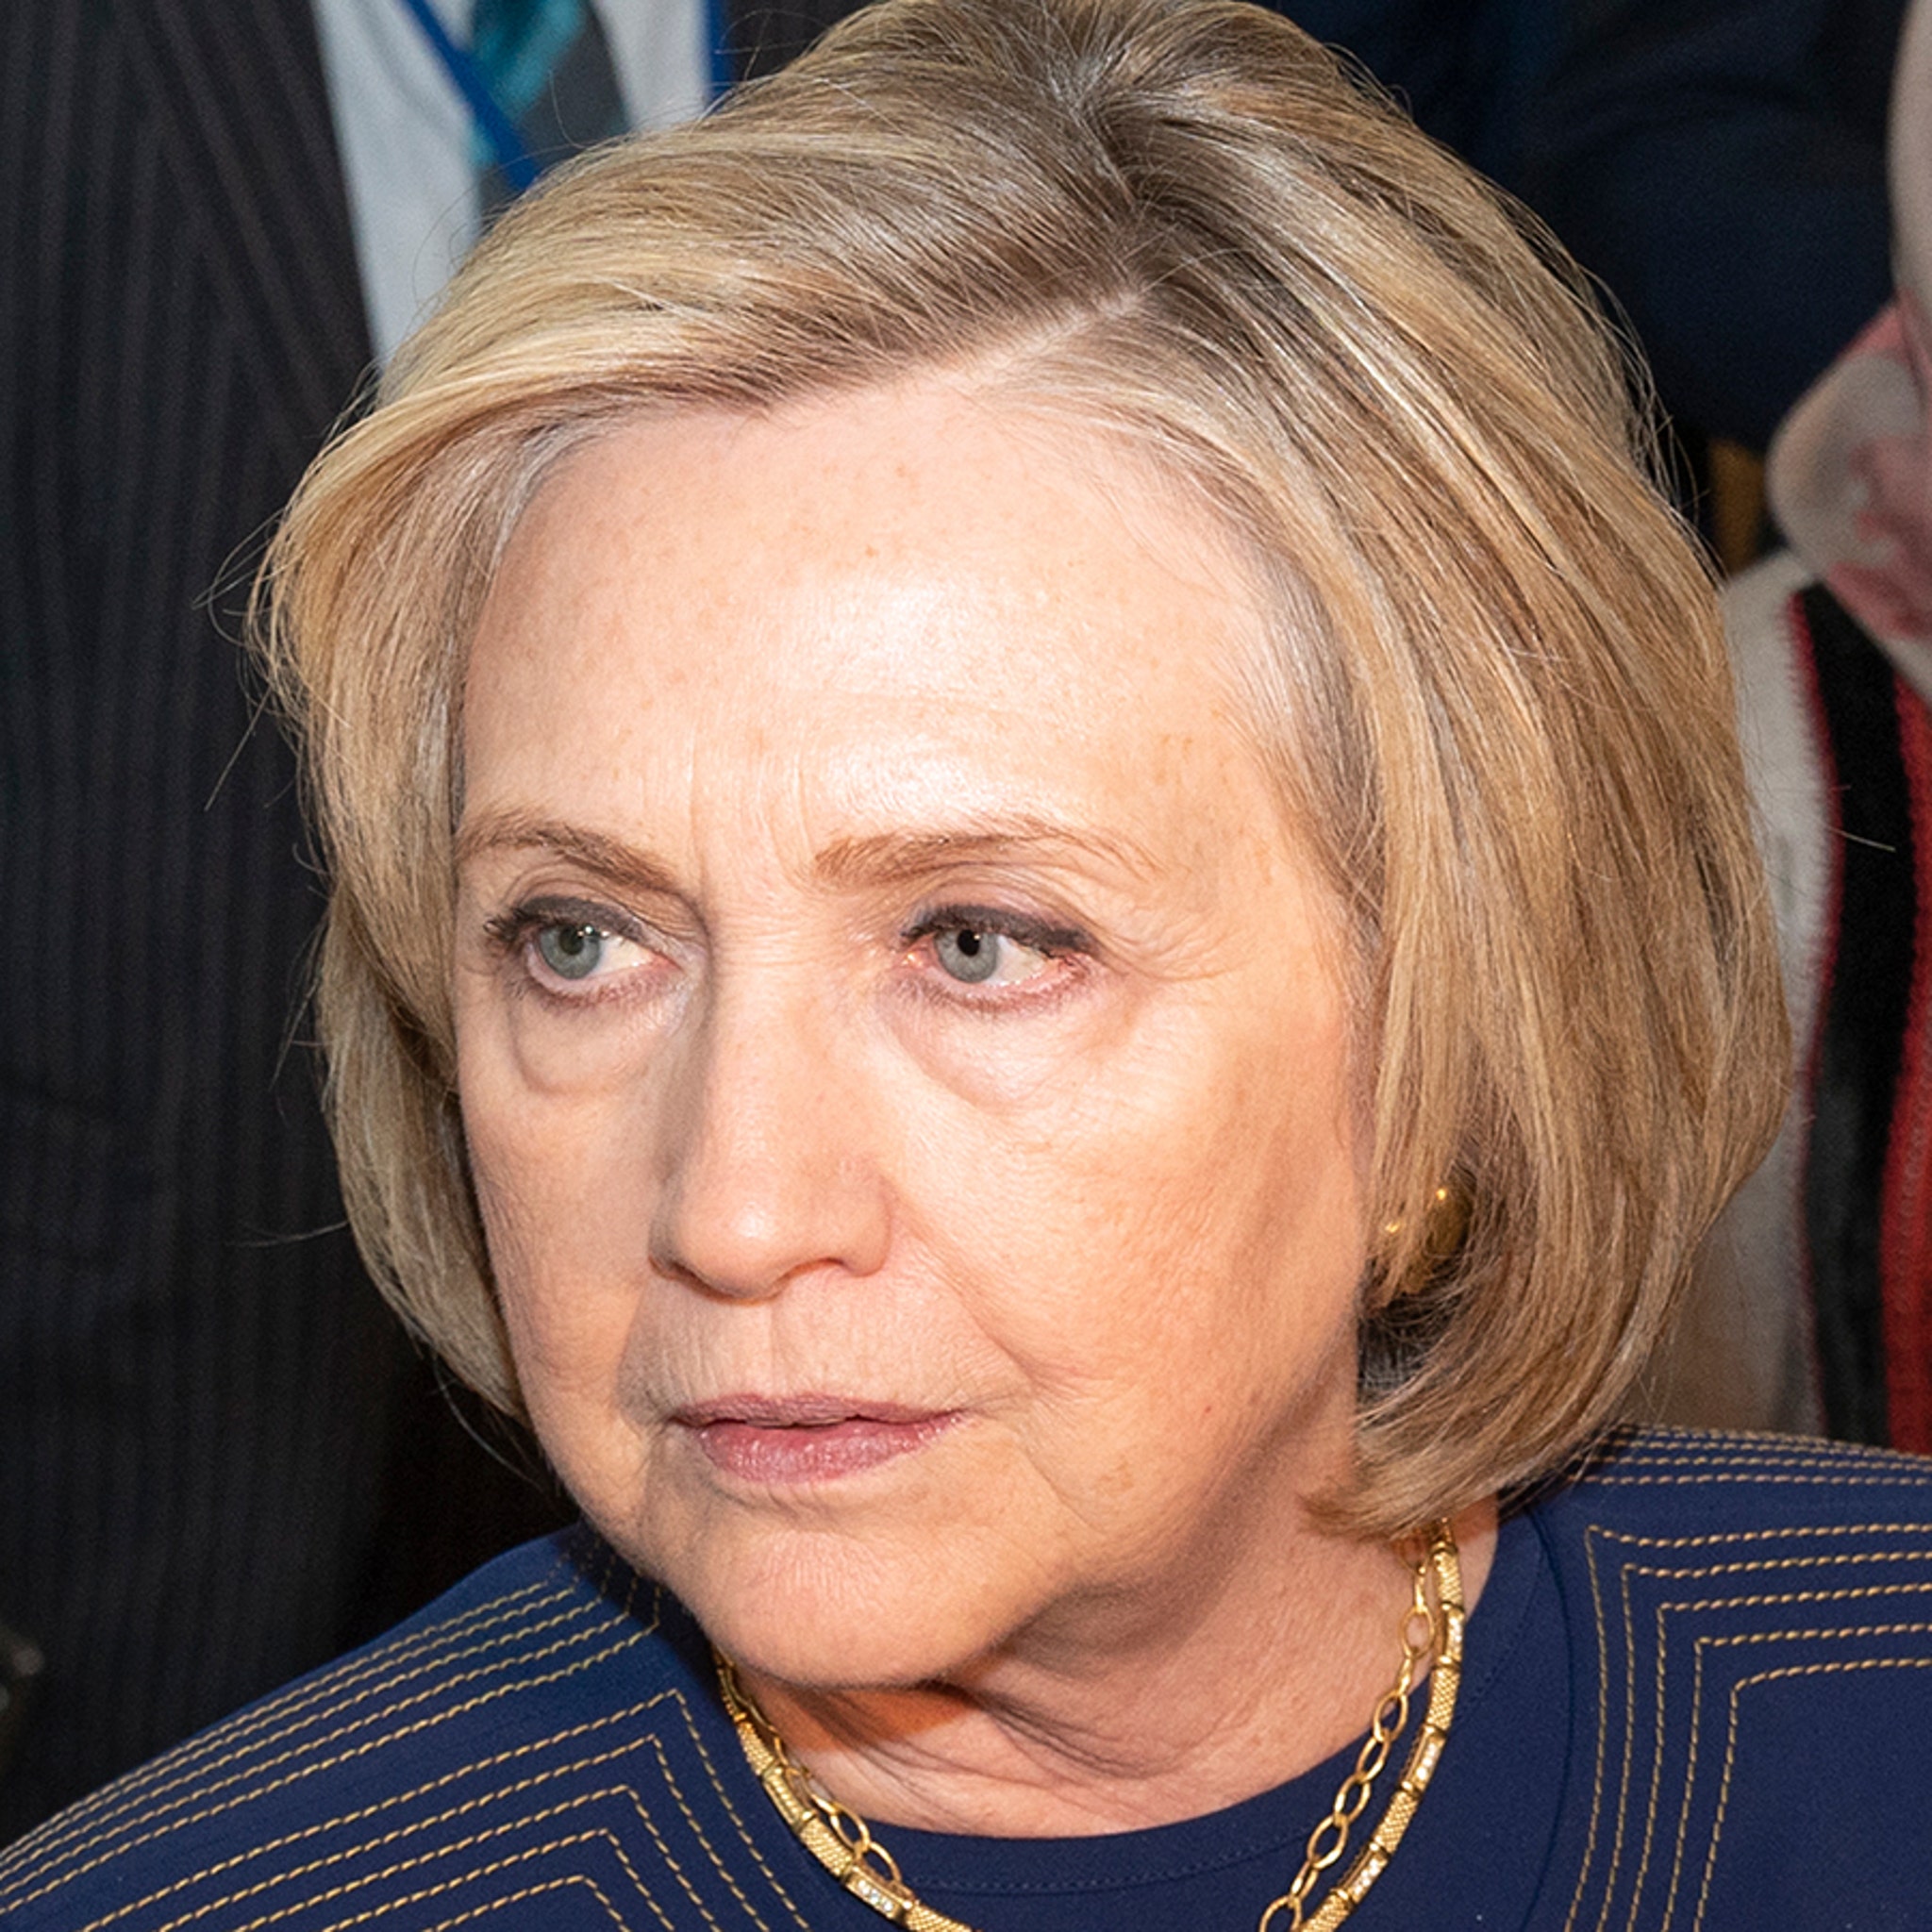 Hillary Clinton tests positive for COVID-19, has 'mild cold